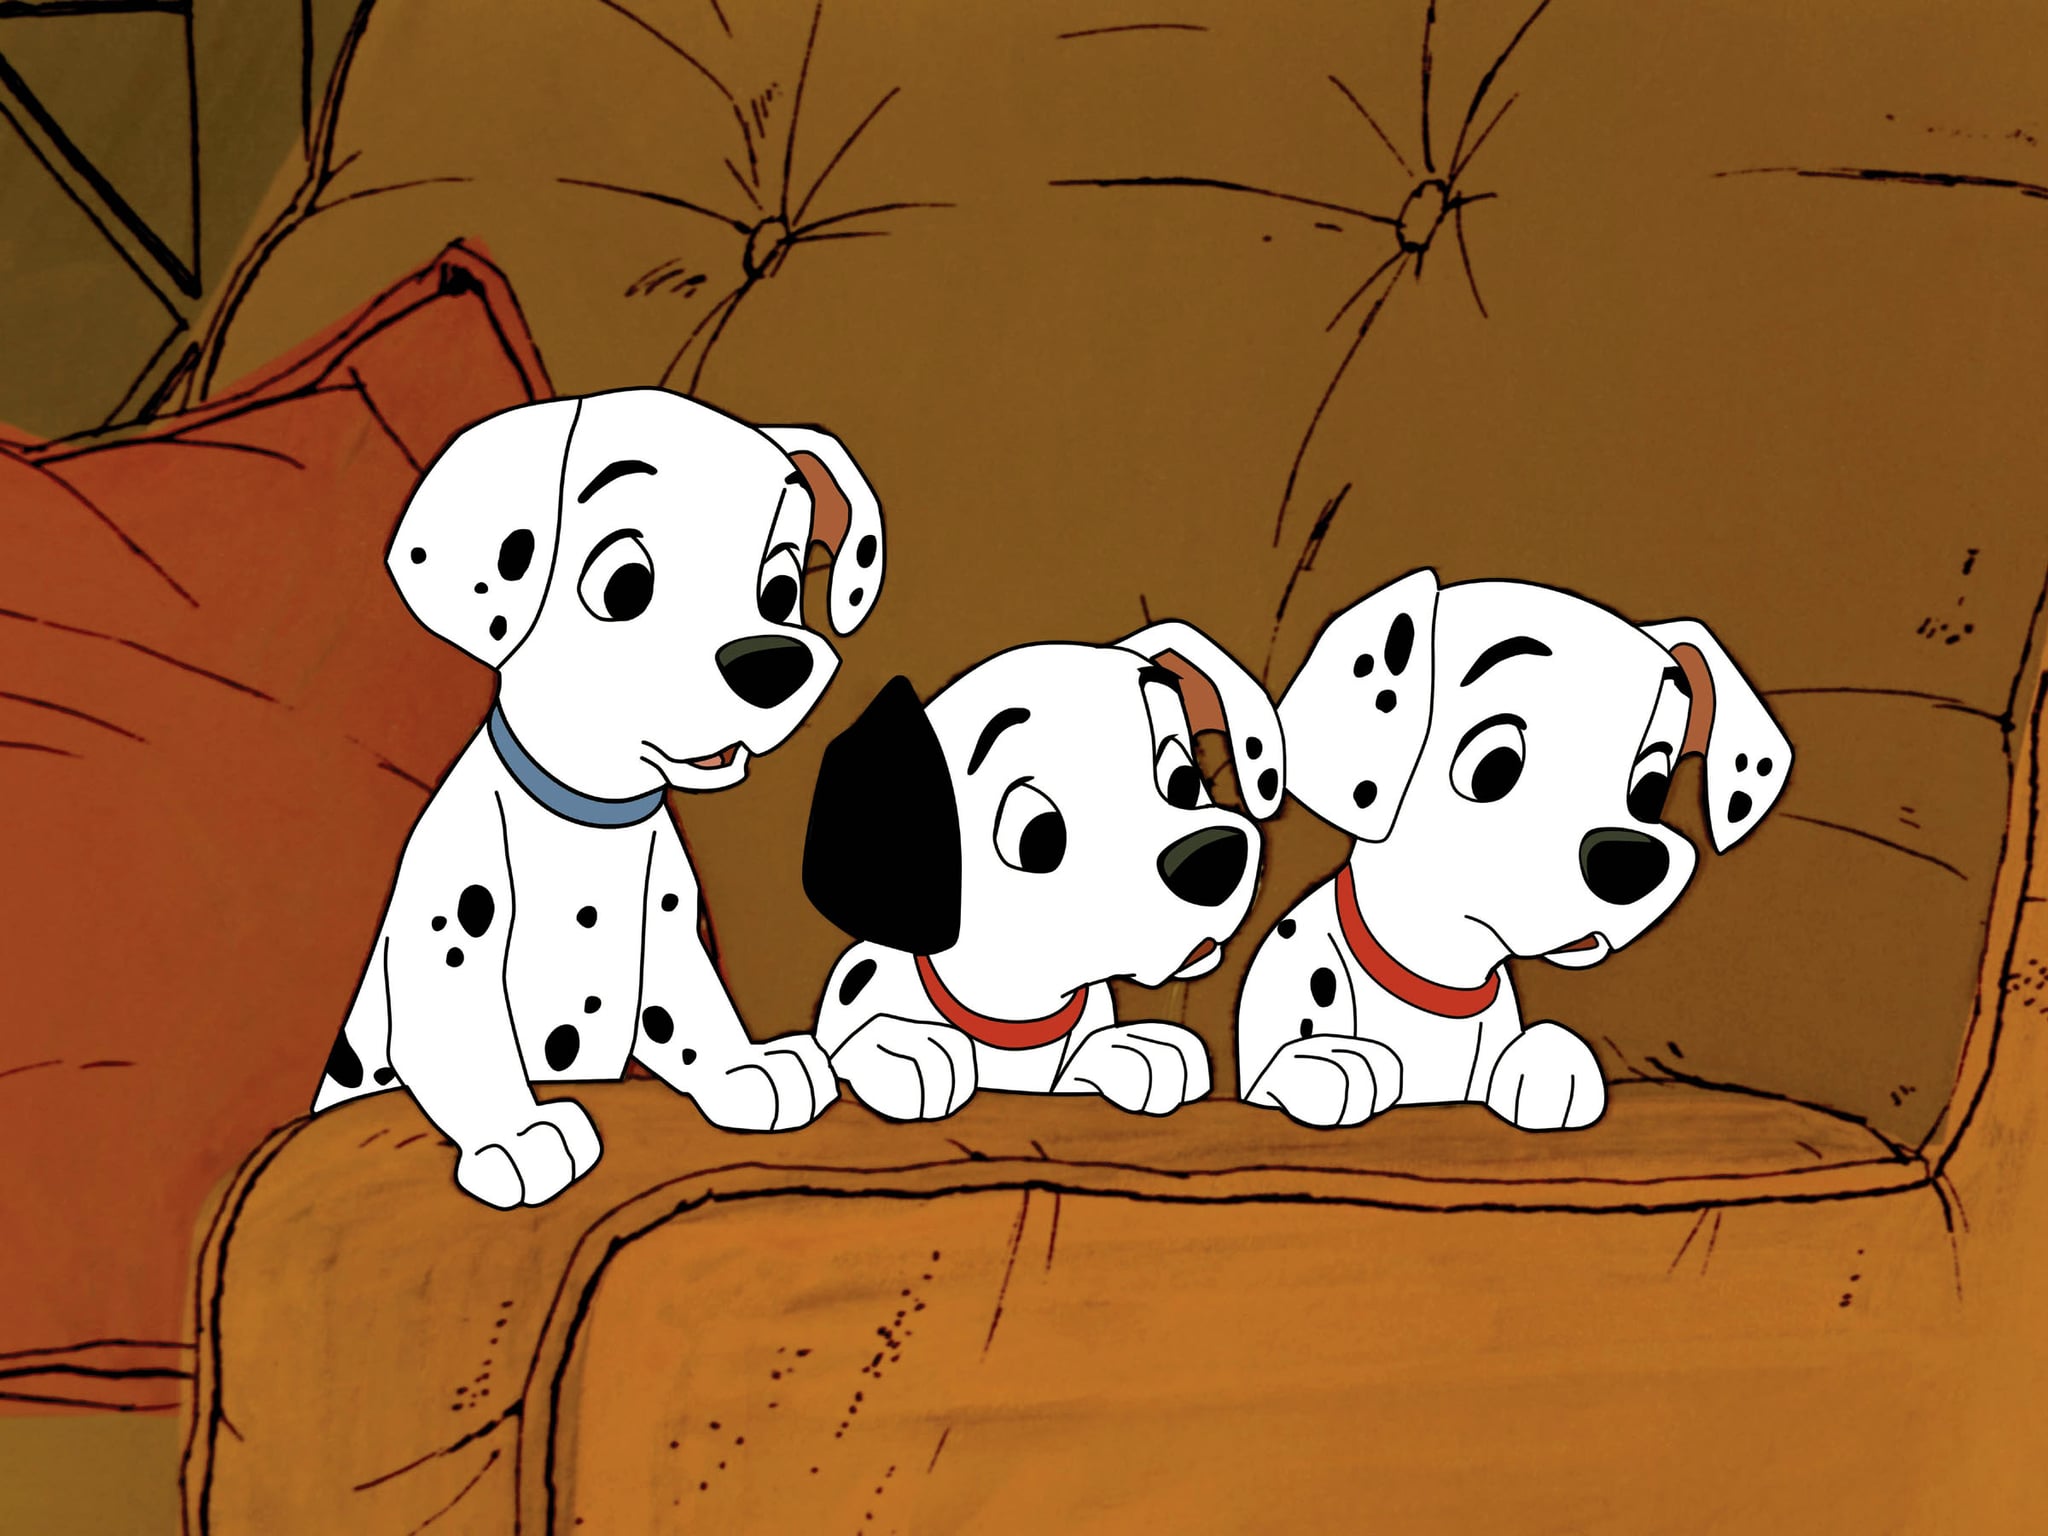 101 DALMATIANS (aka ONE HUNDRED AND ONE DALMATIANS), Dalmatian puppies, 1961, Walt Disney Pictures/courtesy Everett Collection